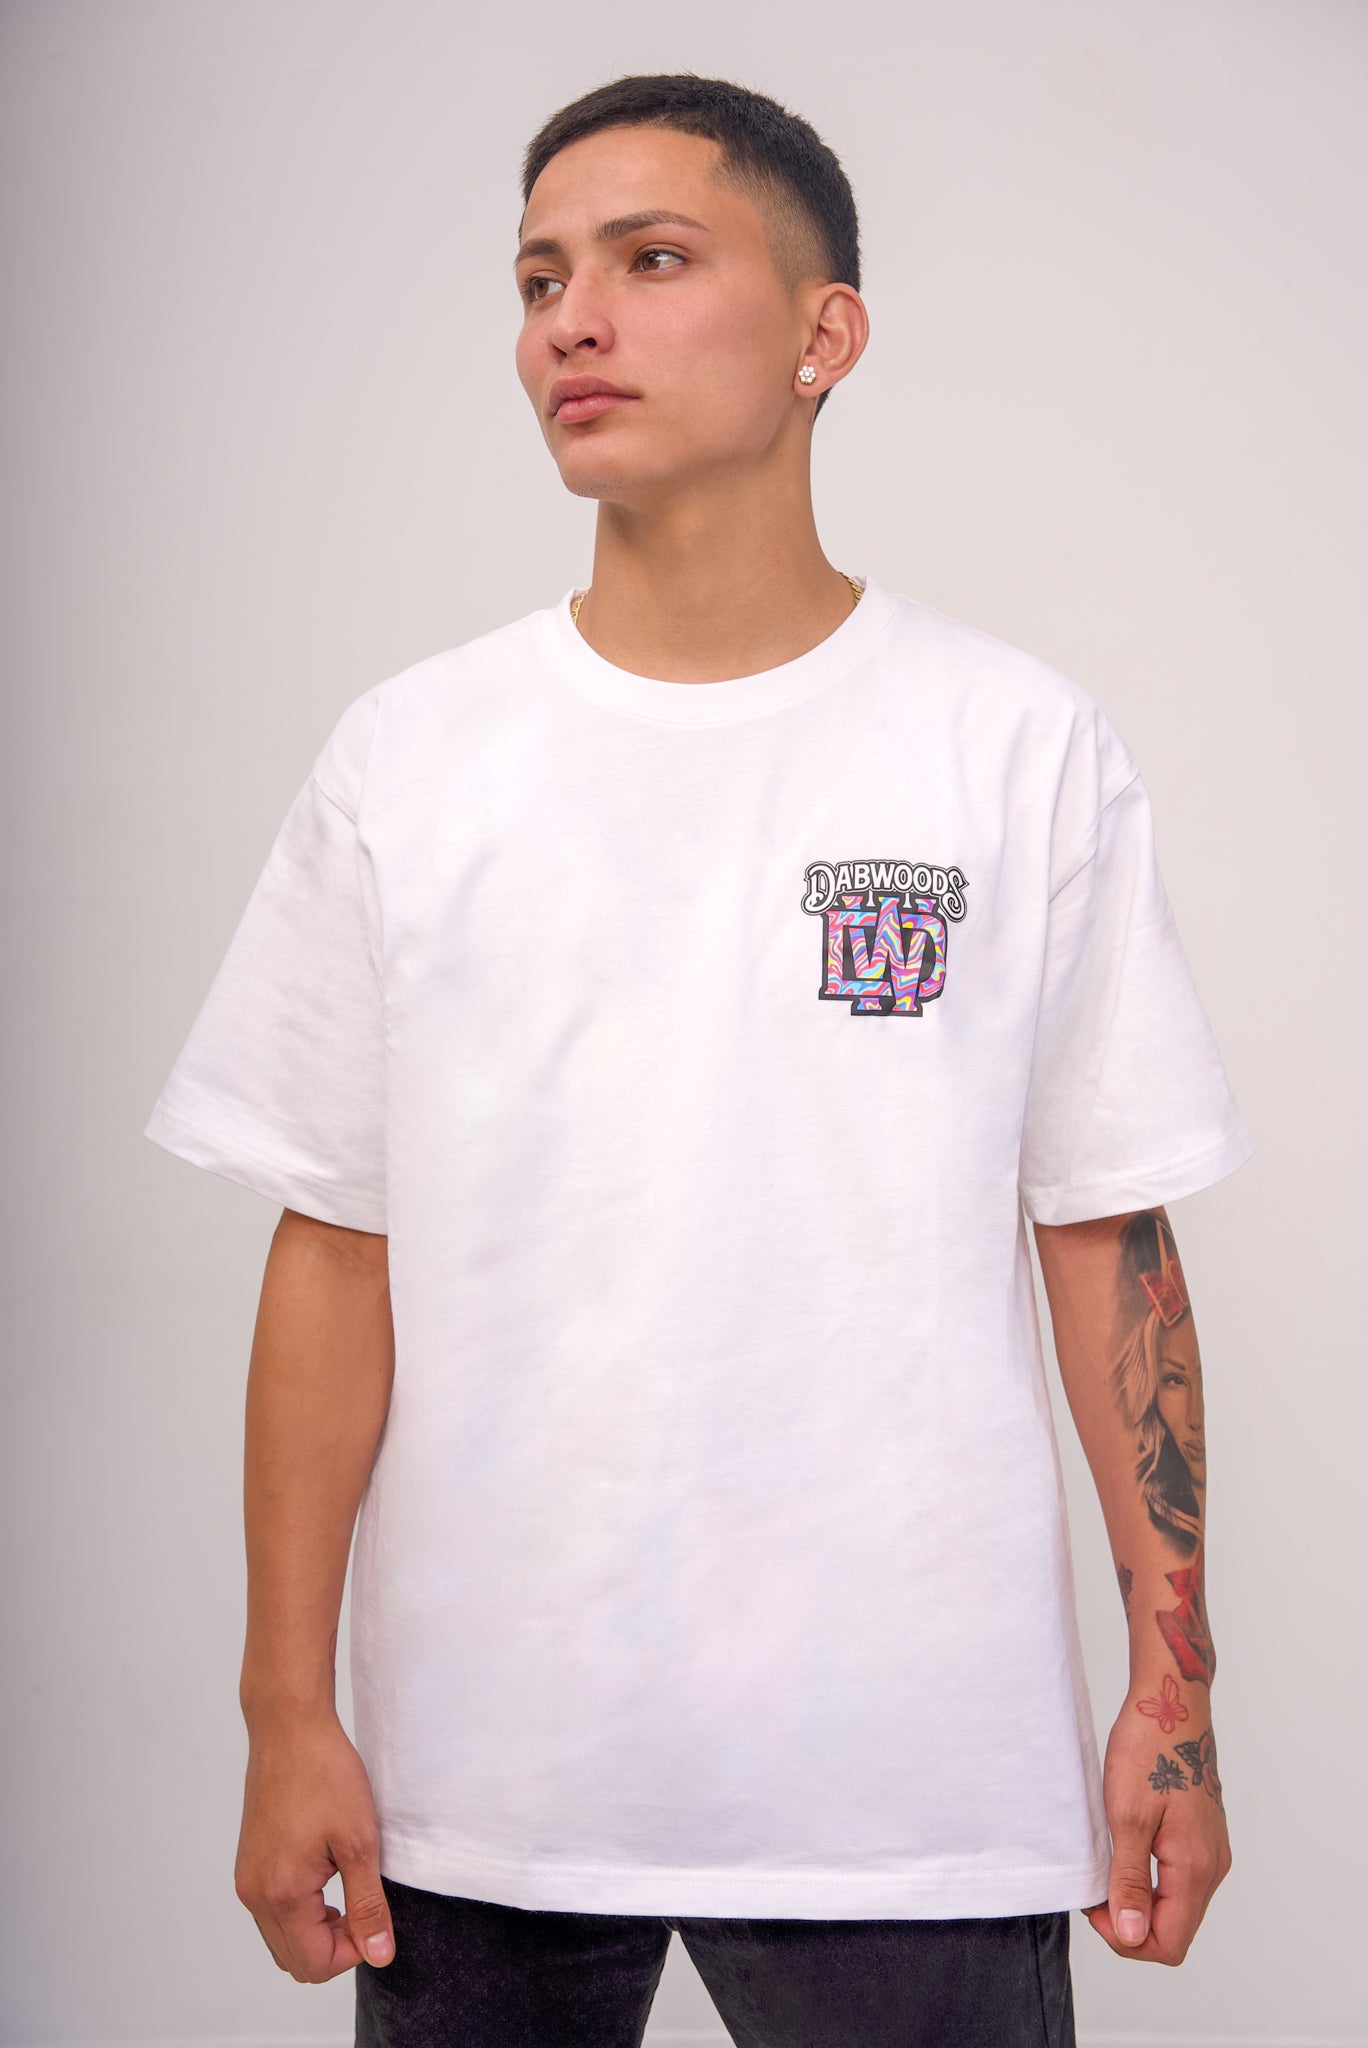 DABWOODS MELTED TEE